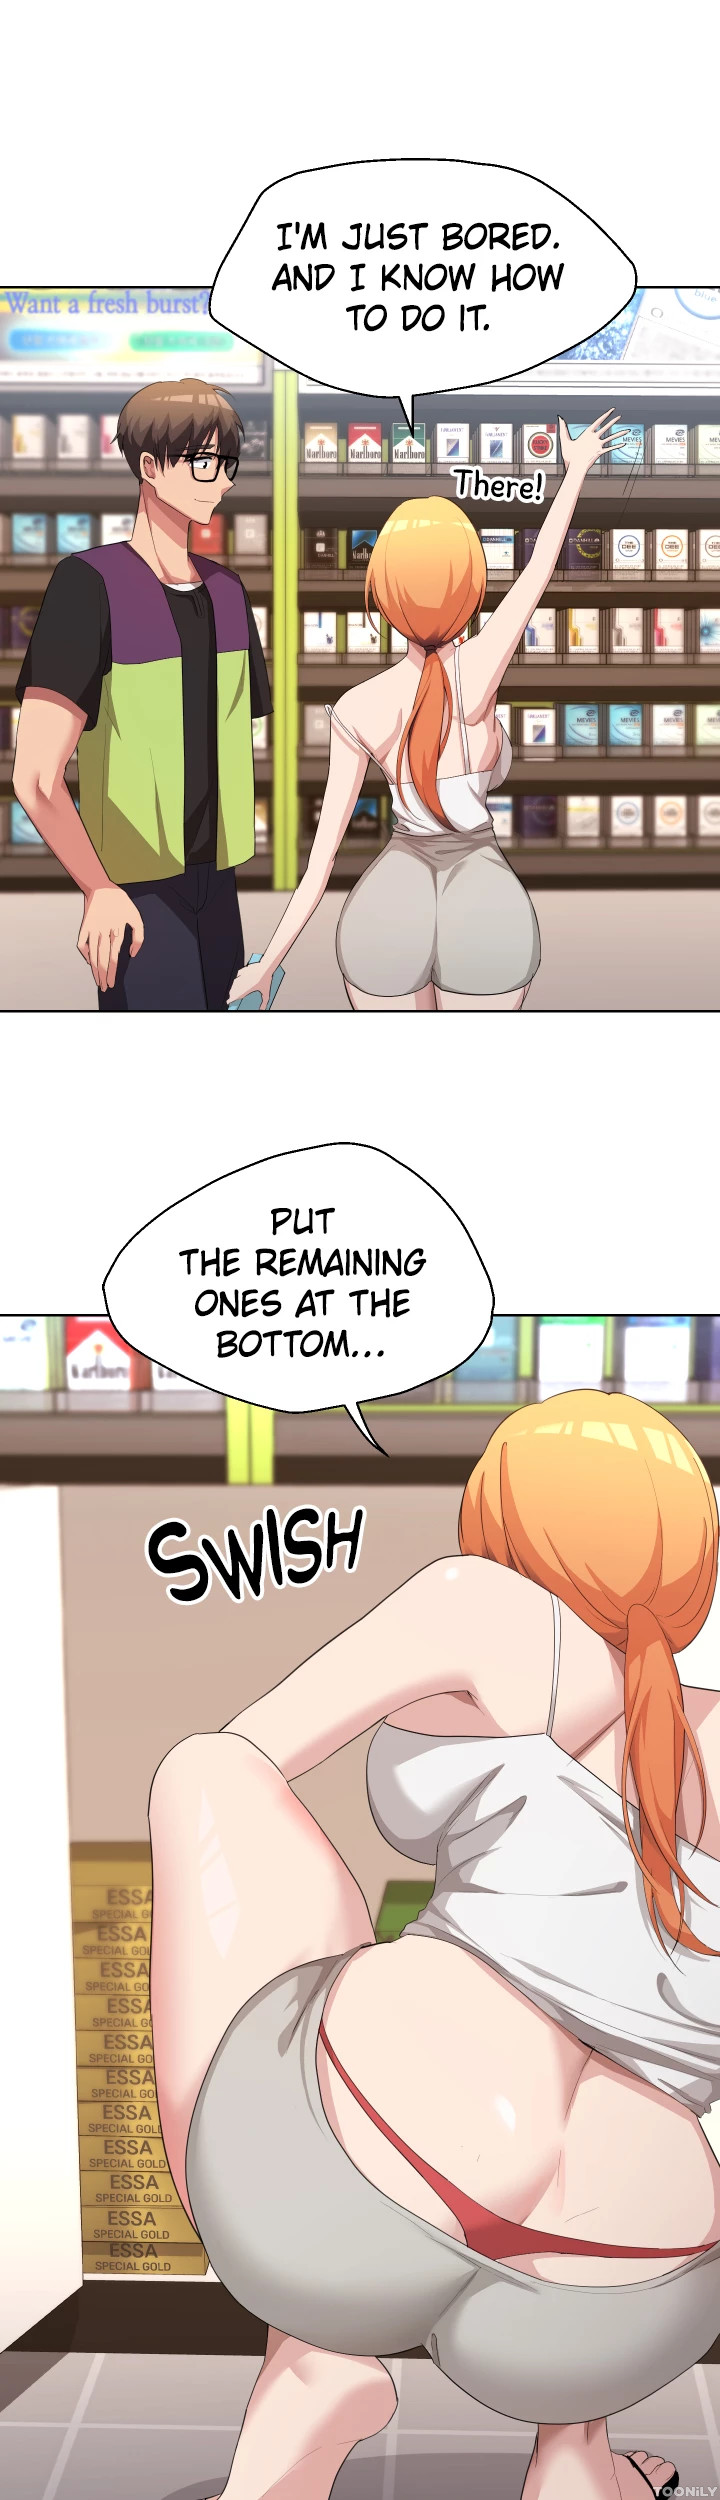 Girls I Used to Teach - Chapter 6 Page 28